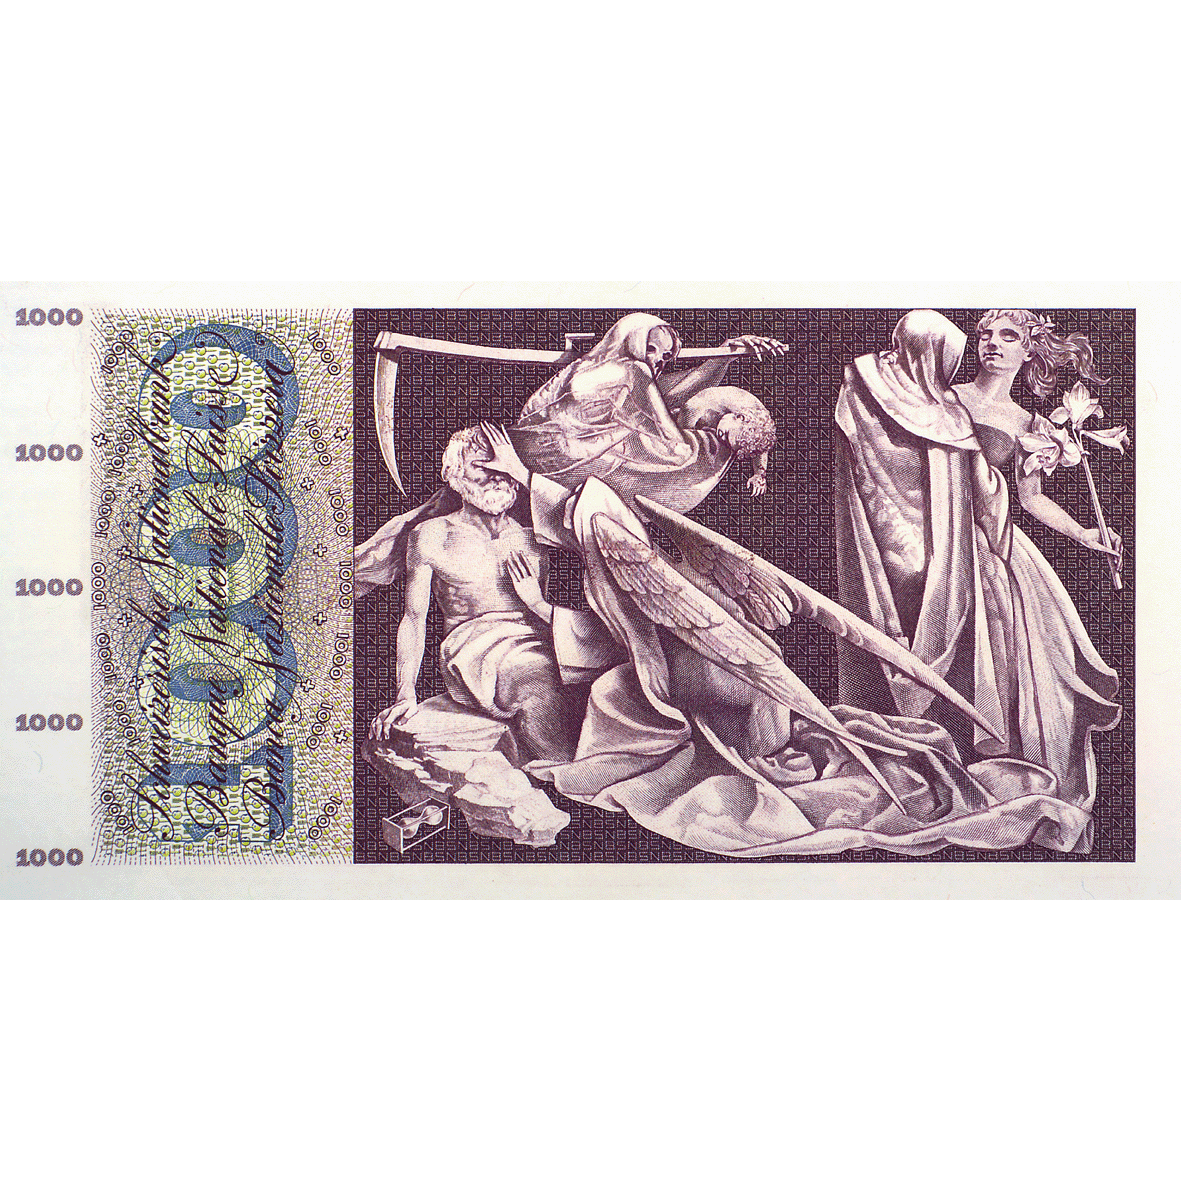 Swiss Confederation, 1,000 Francs (5th Banknote Series, in Circulation 1956-1980) (reverse)